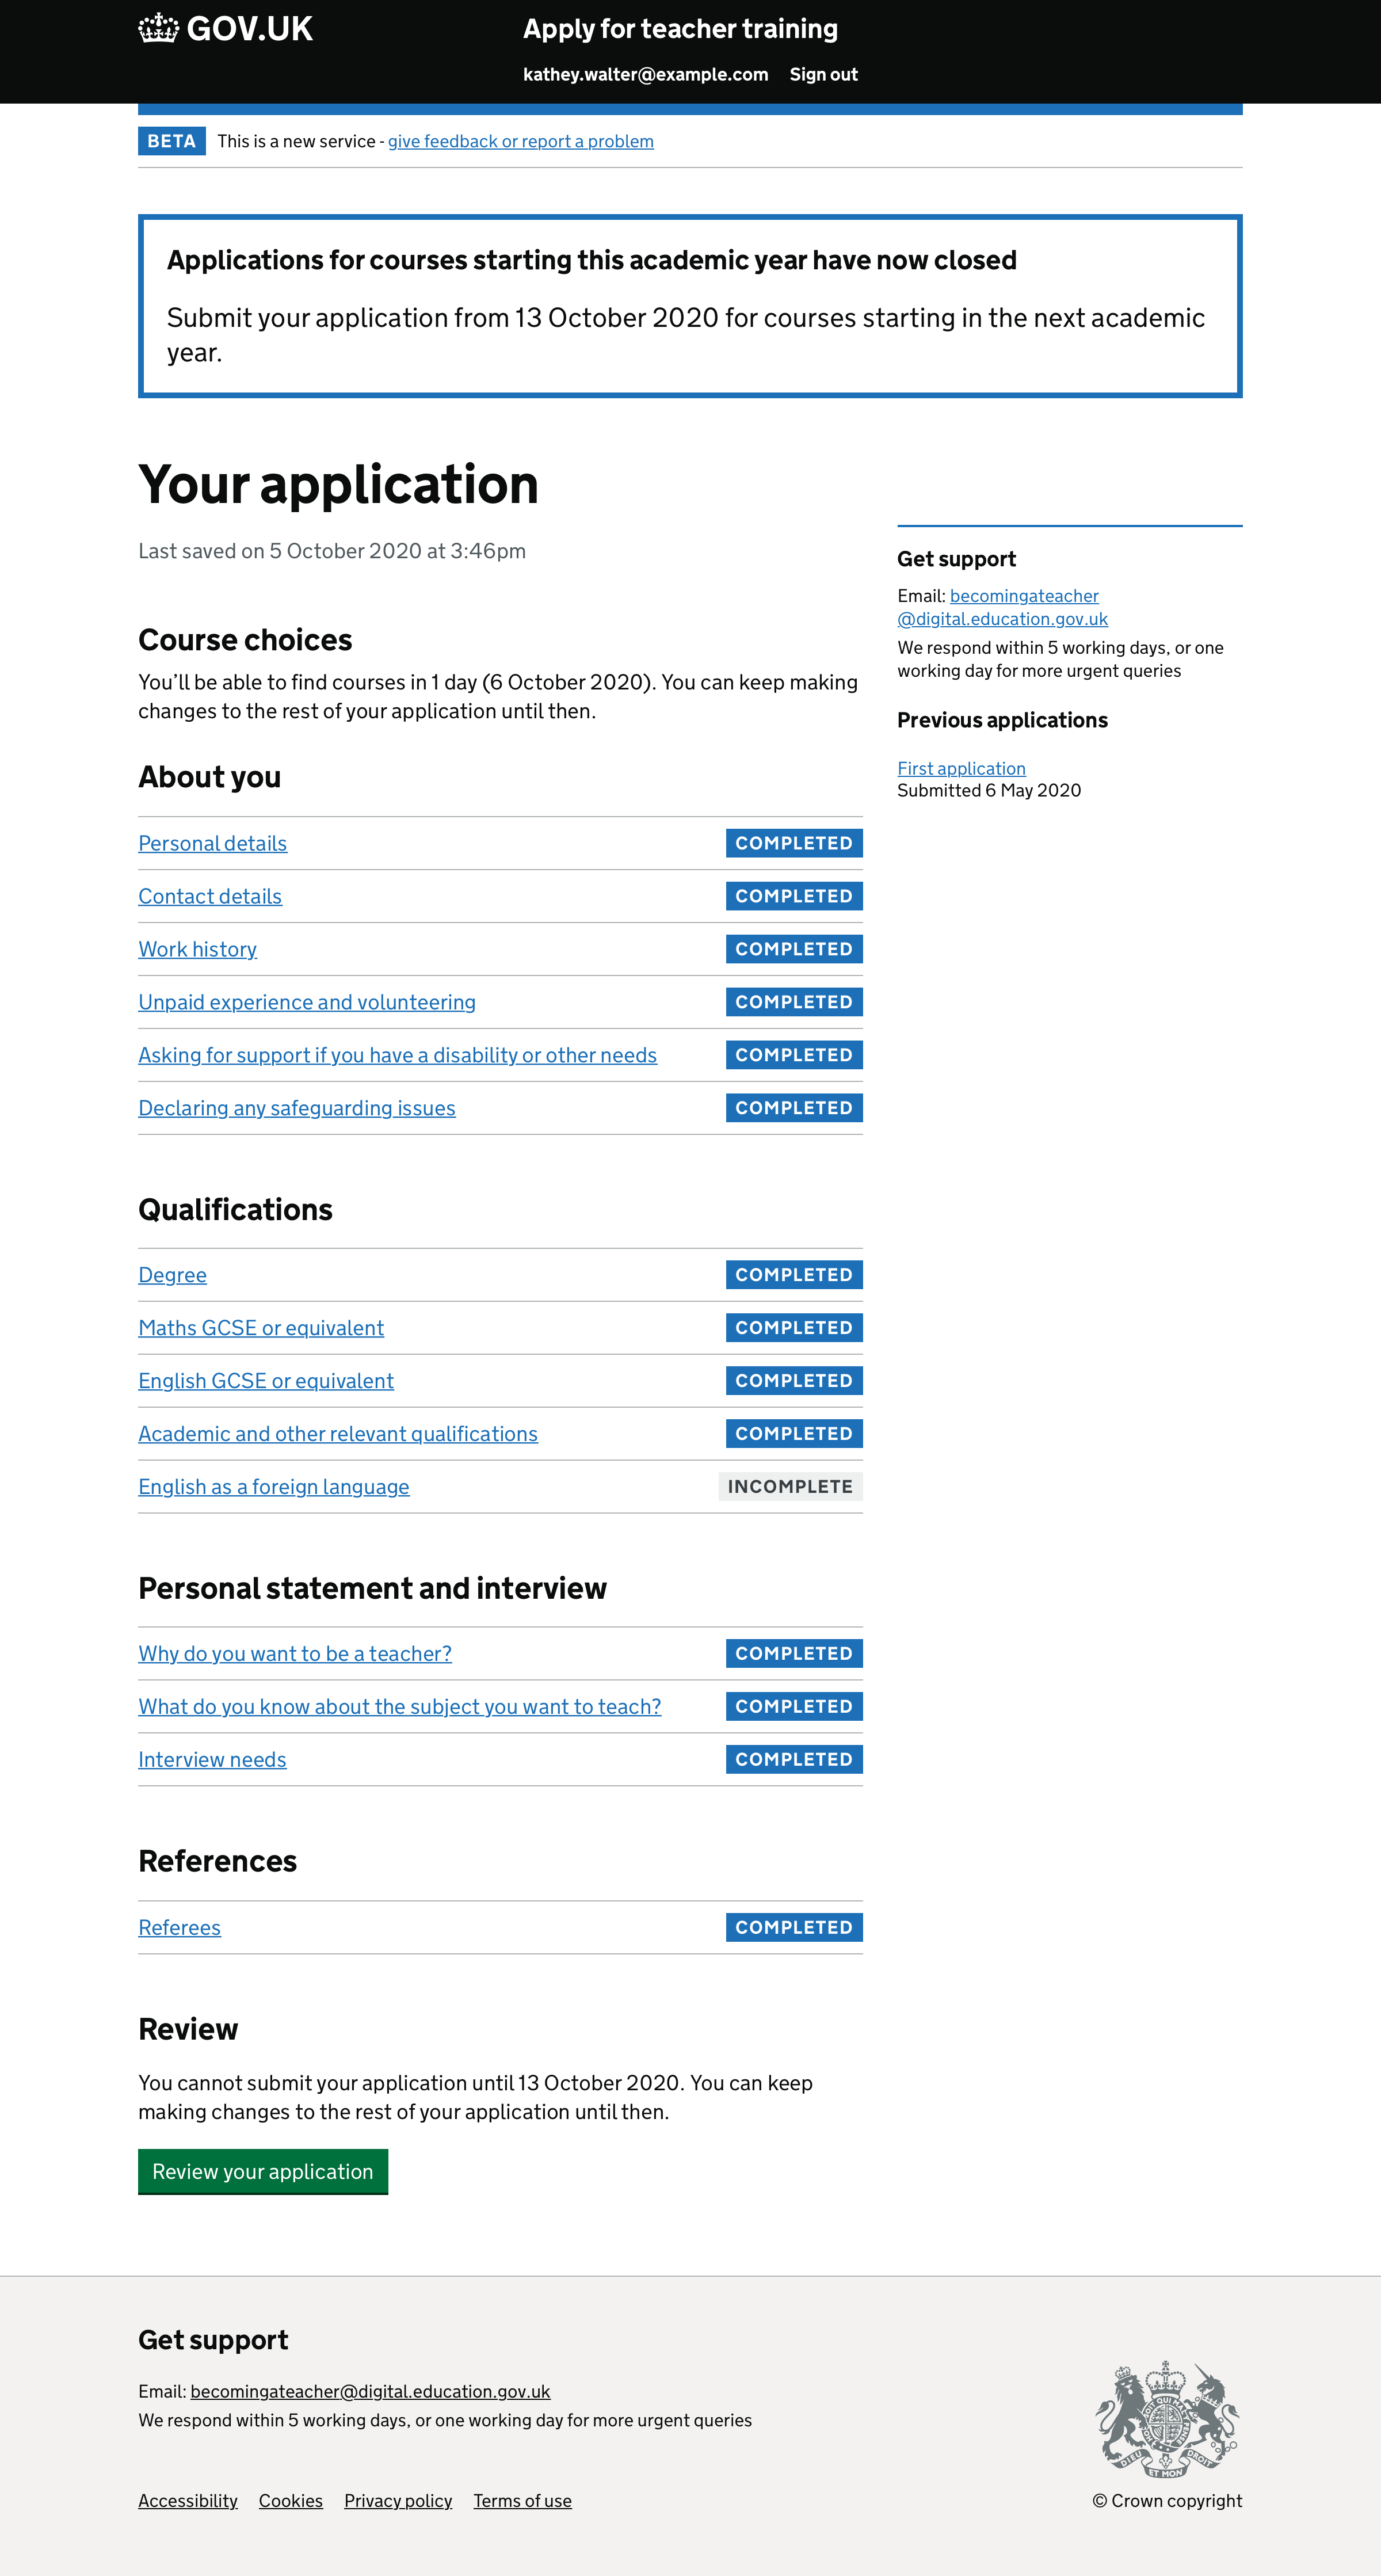 The ‘Your application’ page.